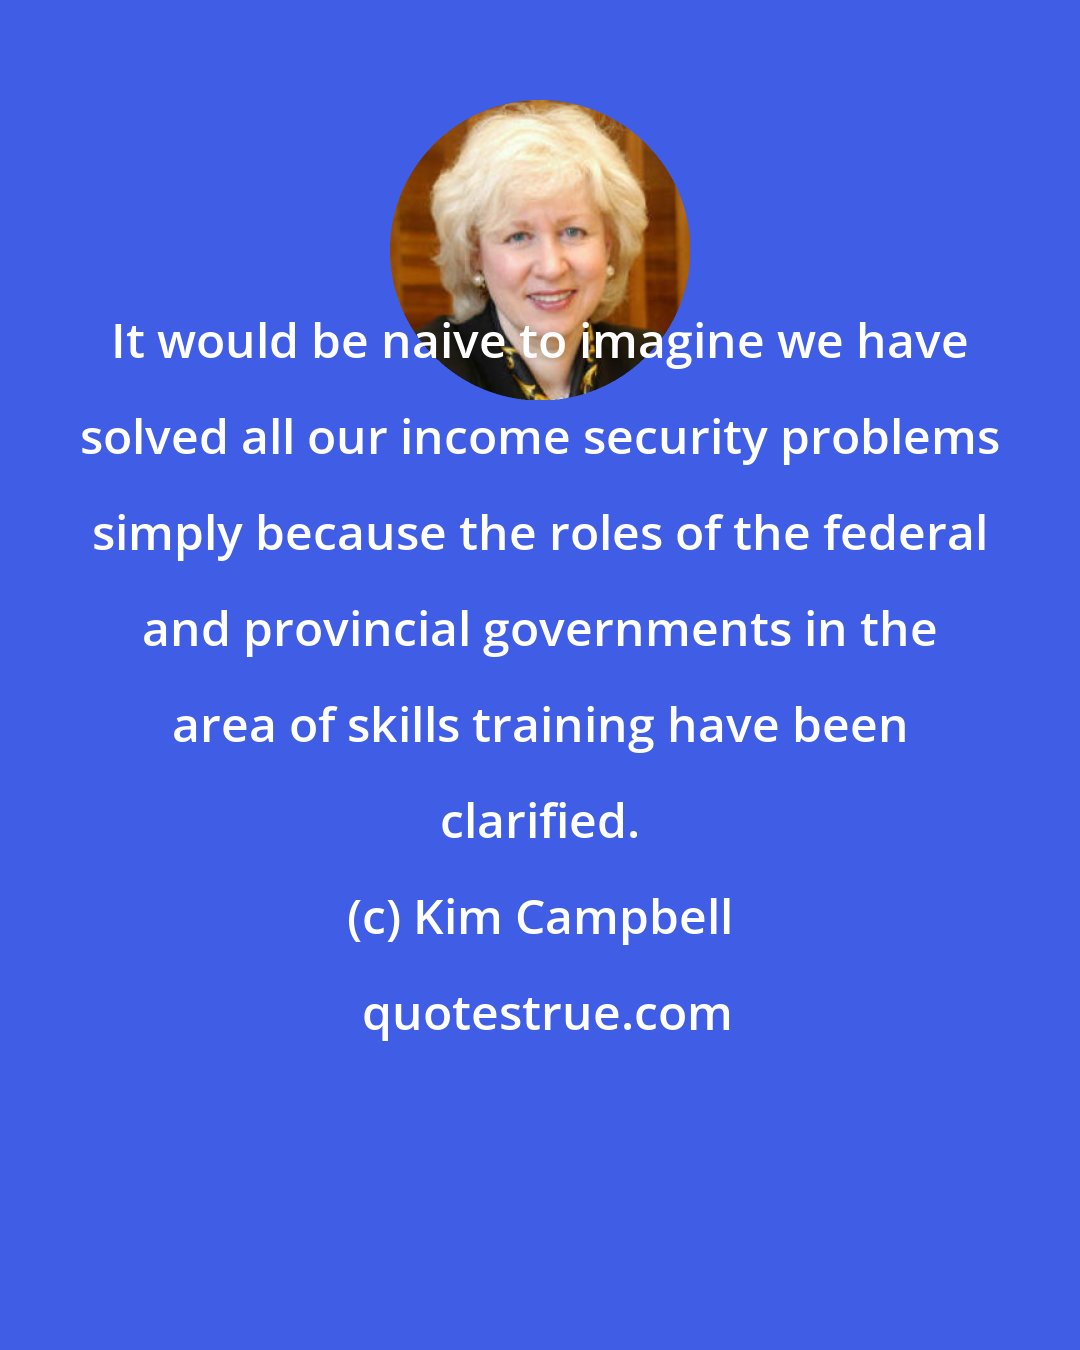 Kim Campbell: It would be naive to imagine we have solved all our income security problems simply because the roles of the federal and provincial governments in the area of skills training have been clarified.